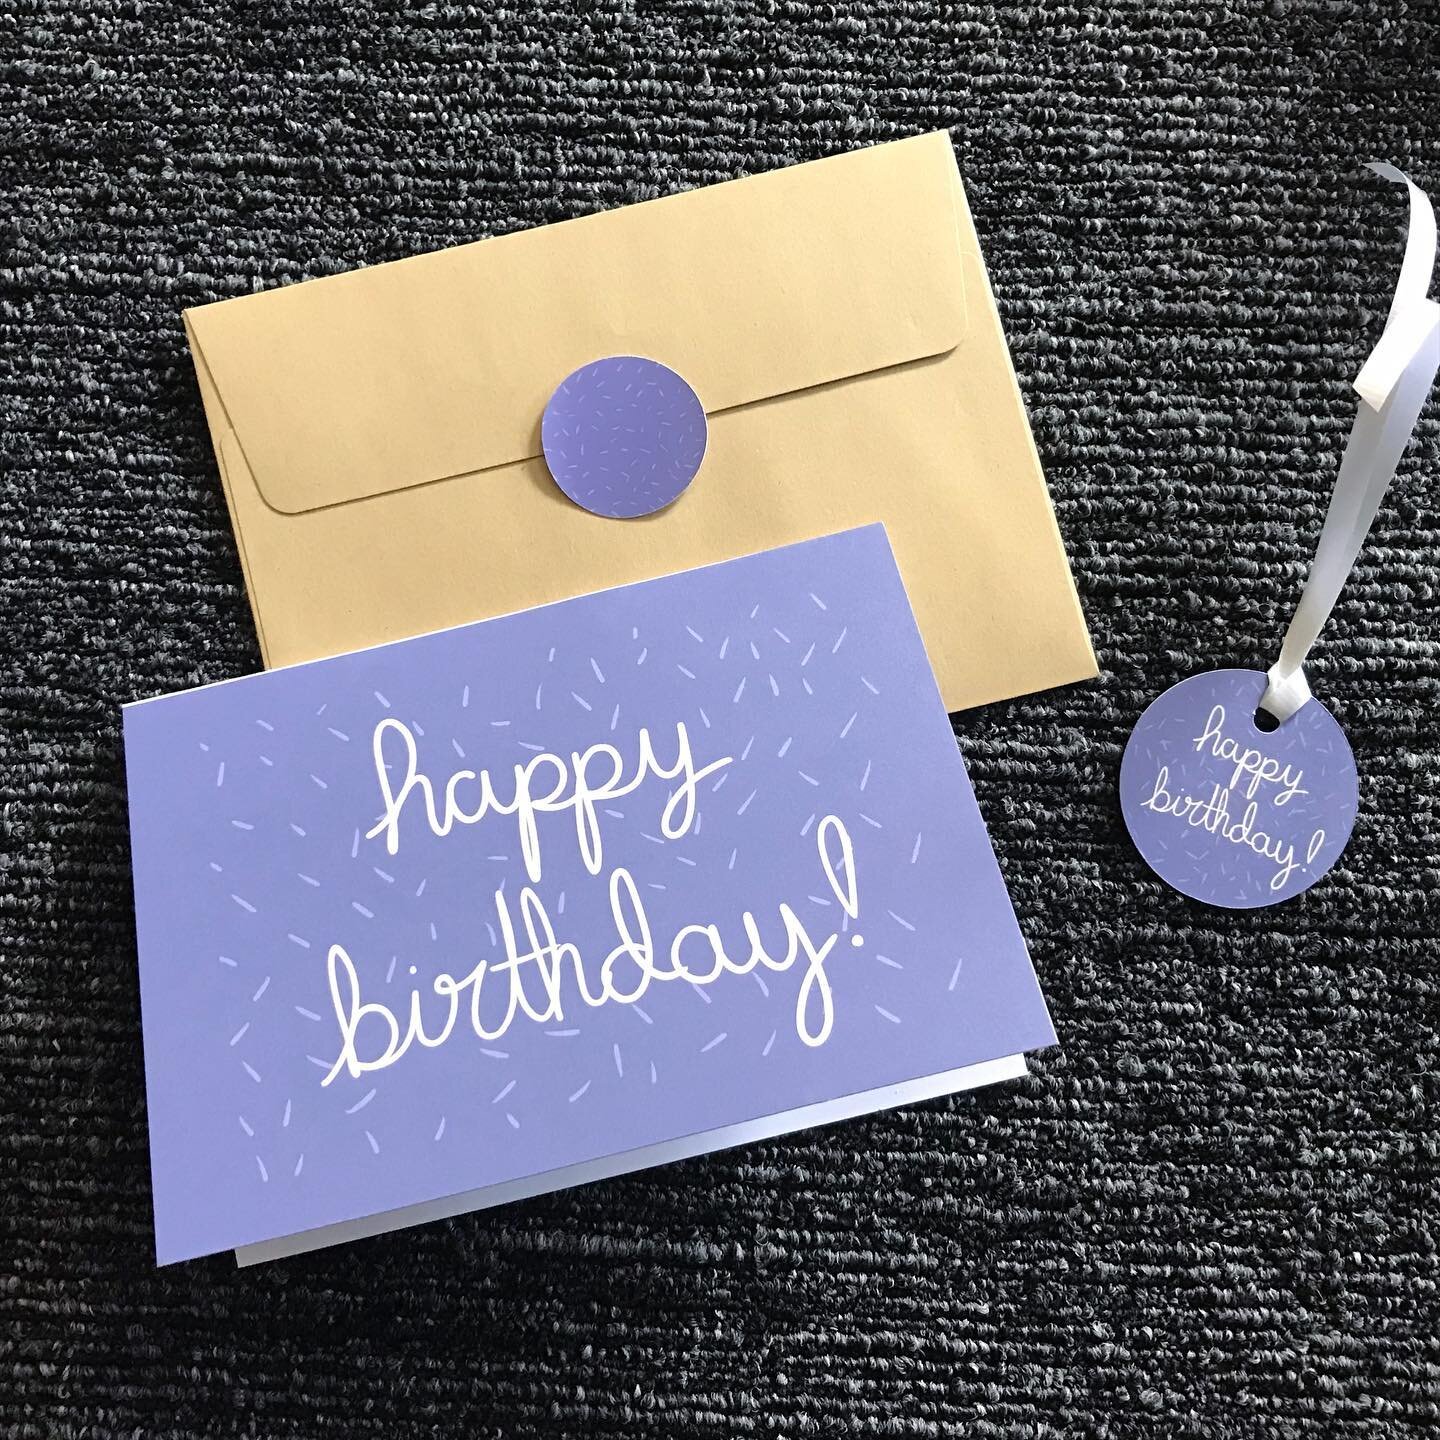 I have finally designed a birthday card! I feel like birthday cards are one of the main things missing from my Etsy shop. 

I went a little crazy Y&rsquo;all! This card comes in 7 different colors and even has a gift tag that matches perfect. I love 